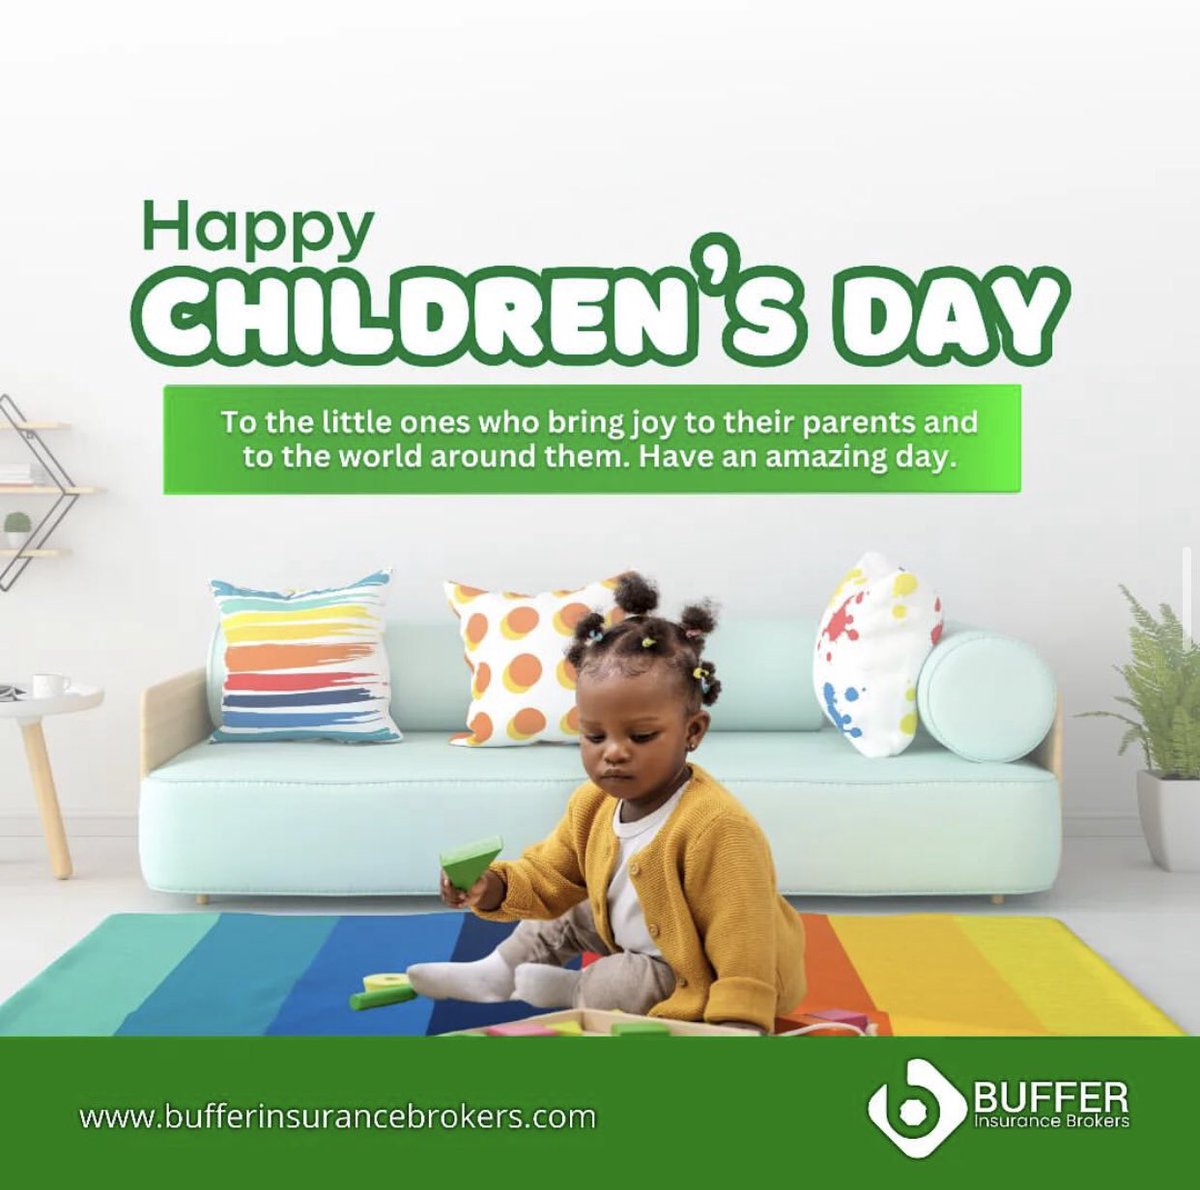 Happy children's day to the amazing little ones that add beauty and light to the world.

May your future be wonderful. Enjoy a beautiful day.

#childrensday #childrensday2023 #weekendfun❤️ #weekend #saturdayvibes #saturday #excitment  #Stayamazing